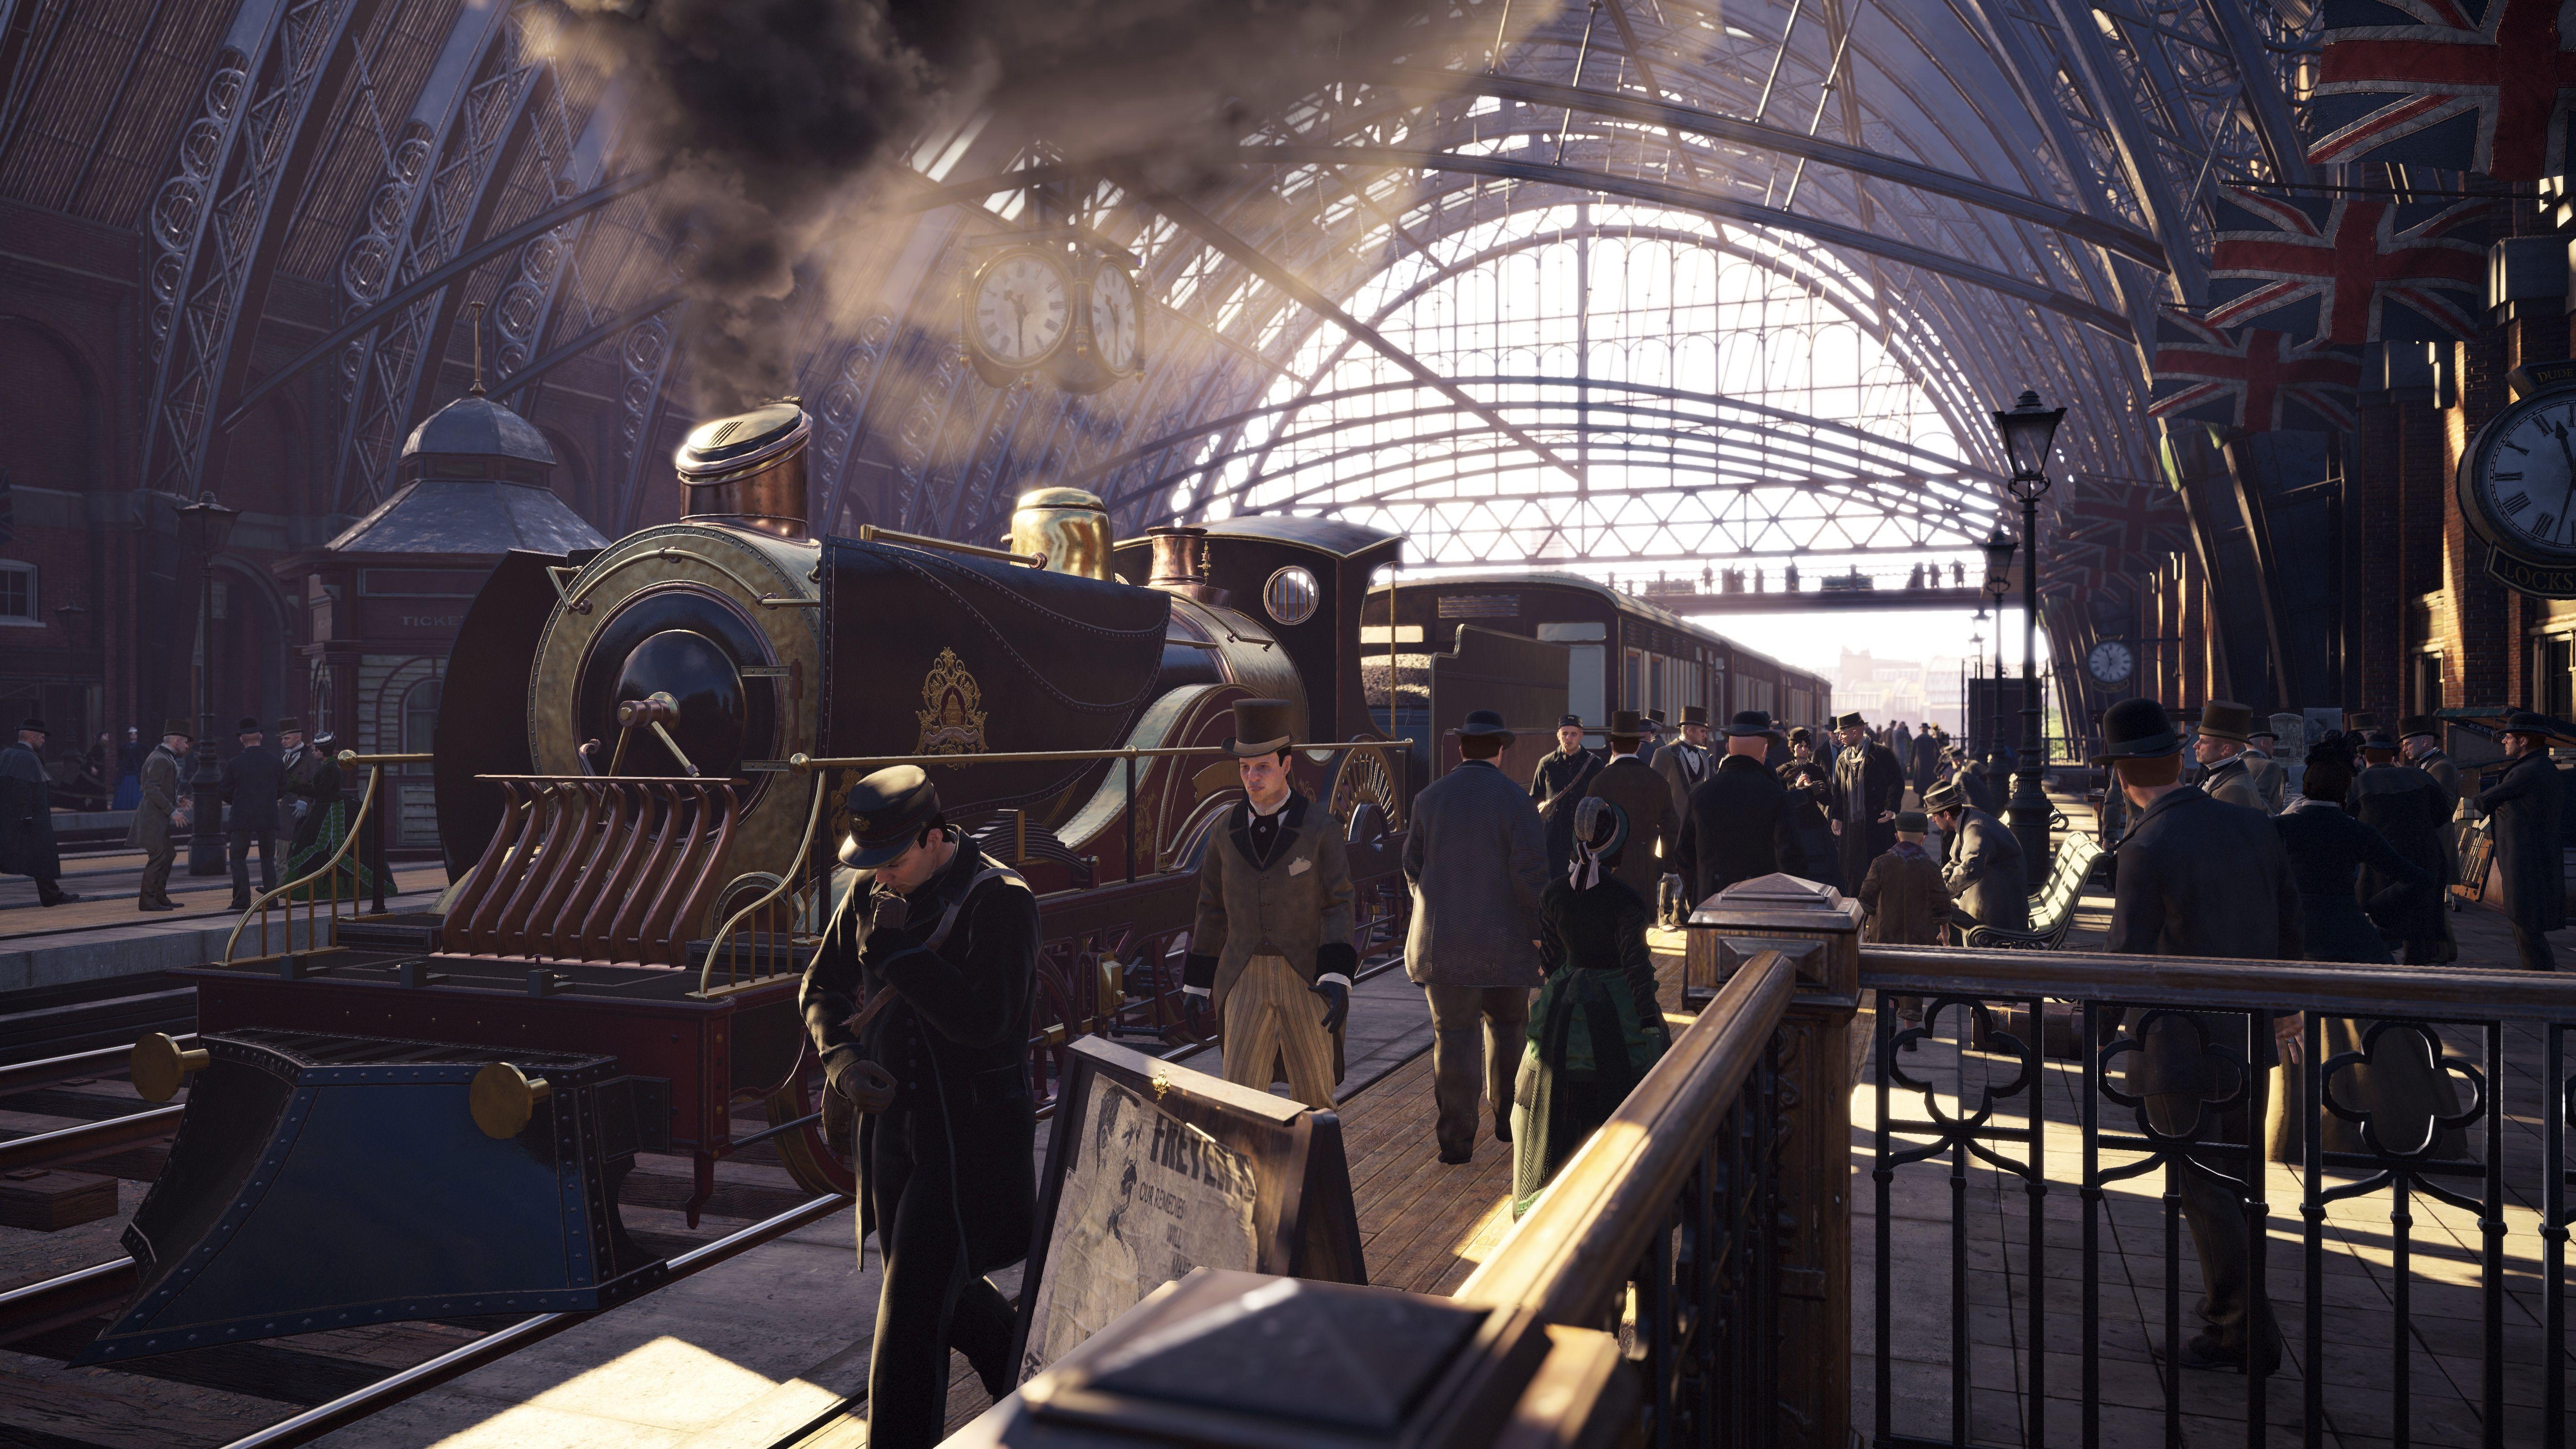 110 Assassin&Creed: Syndicate HD Wallpapers